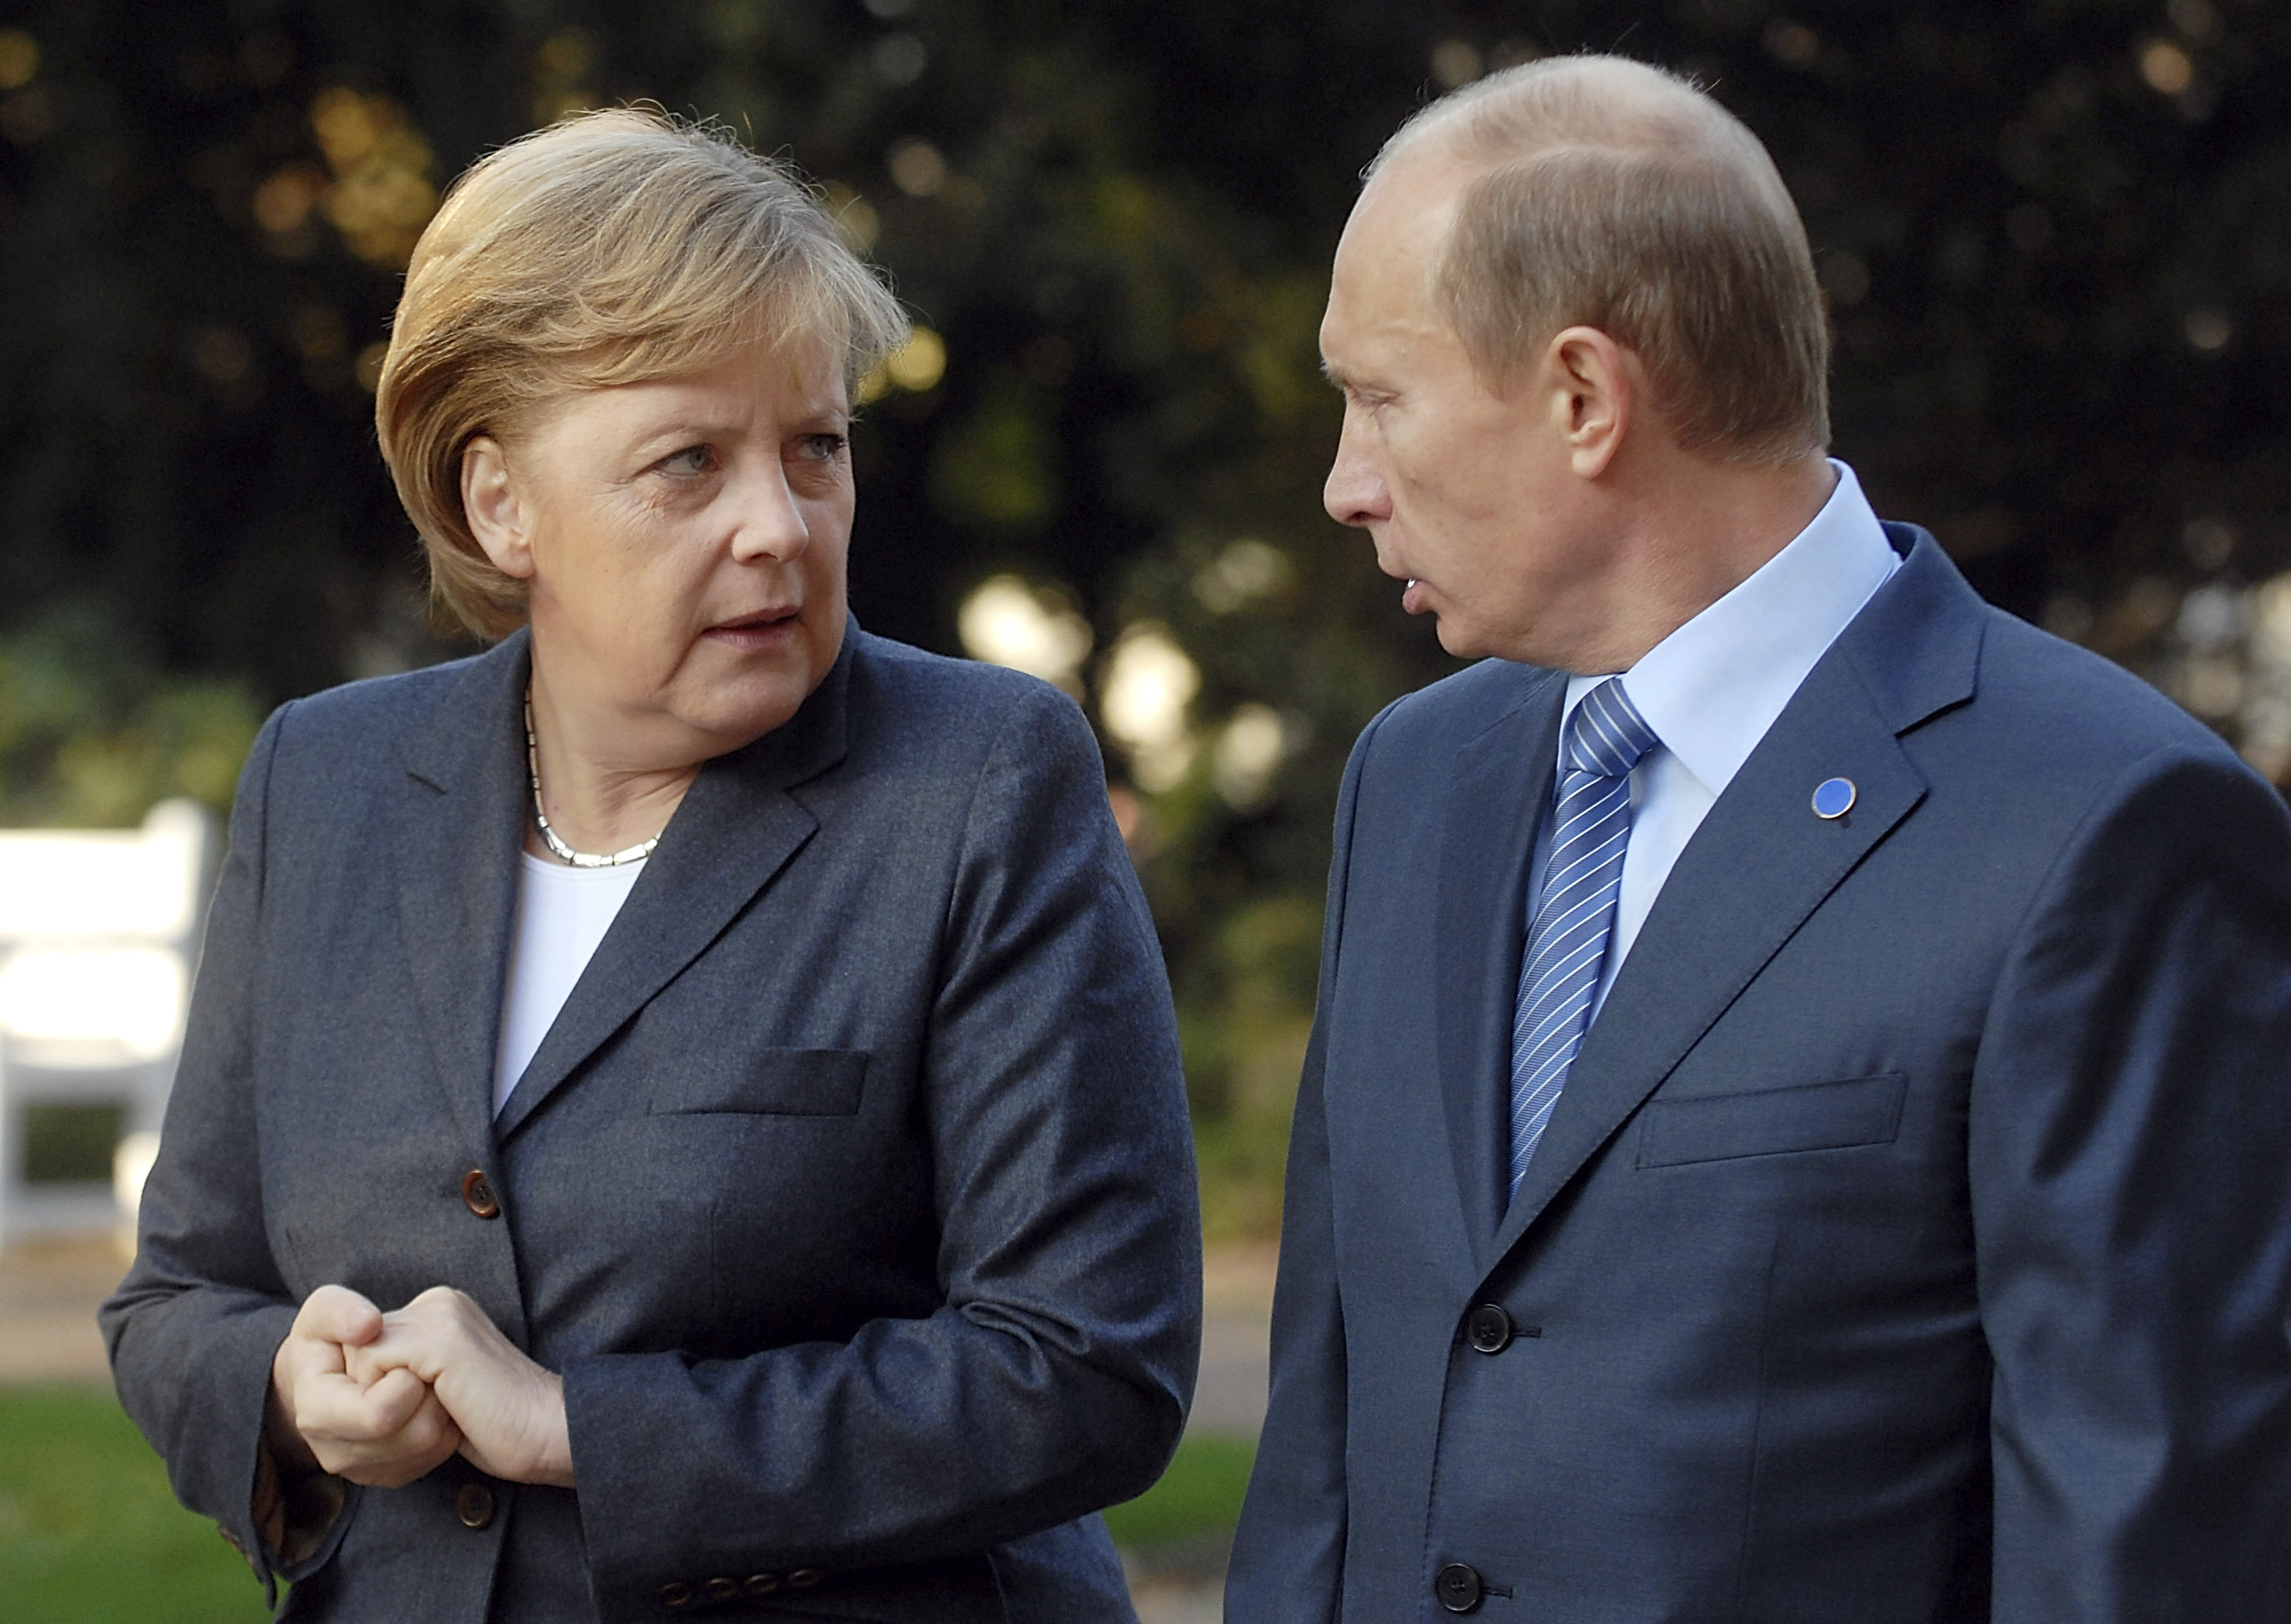 FILE: Russia's President Vladimir Putin talks to German Chancellor Angela Merkel at the Kurhaus resort garden in Wiesbaden, October 15, 2007. Putin is on a two-day visit to Germany for talks between Germany and Russia. Photo:  REUTERS